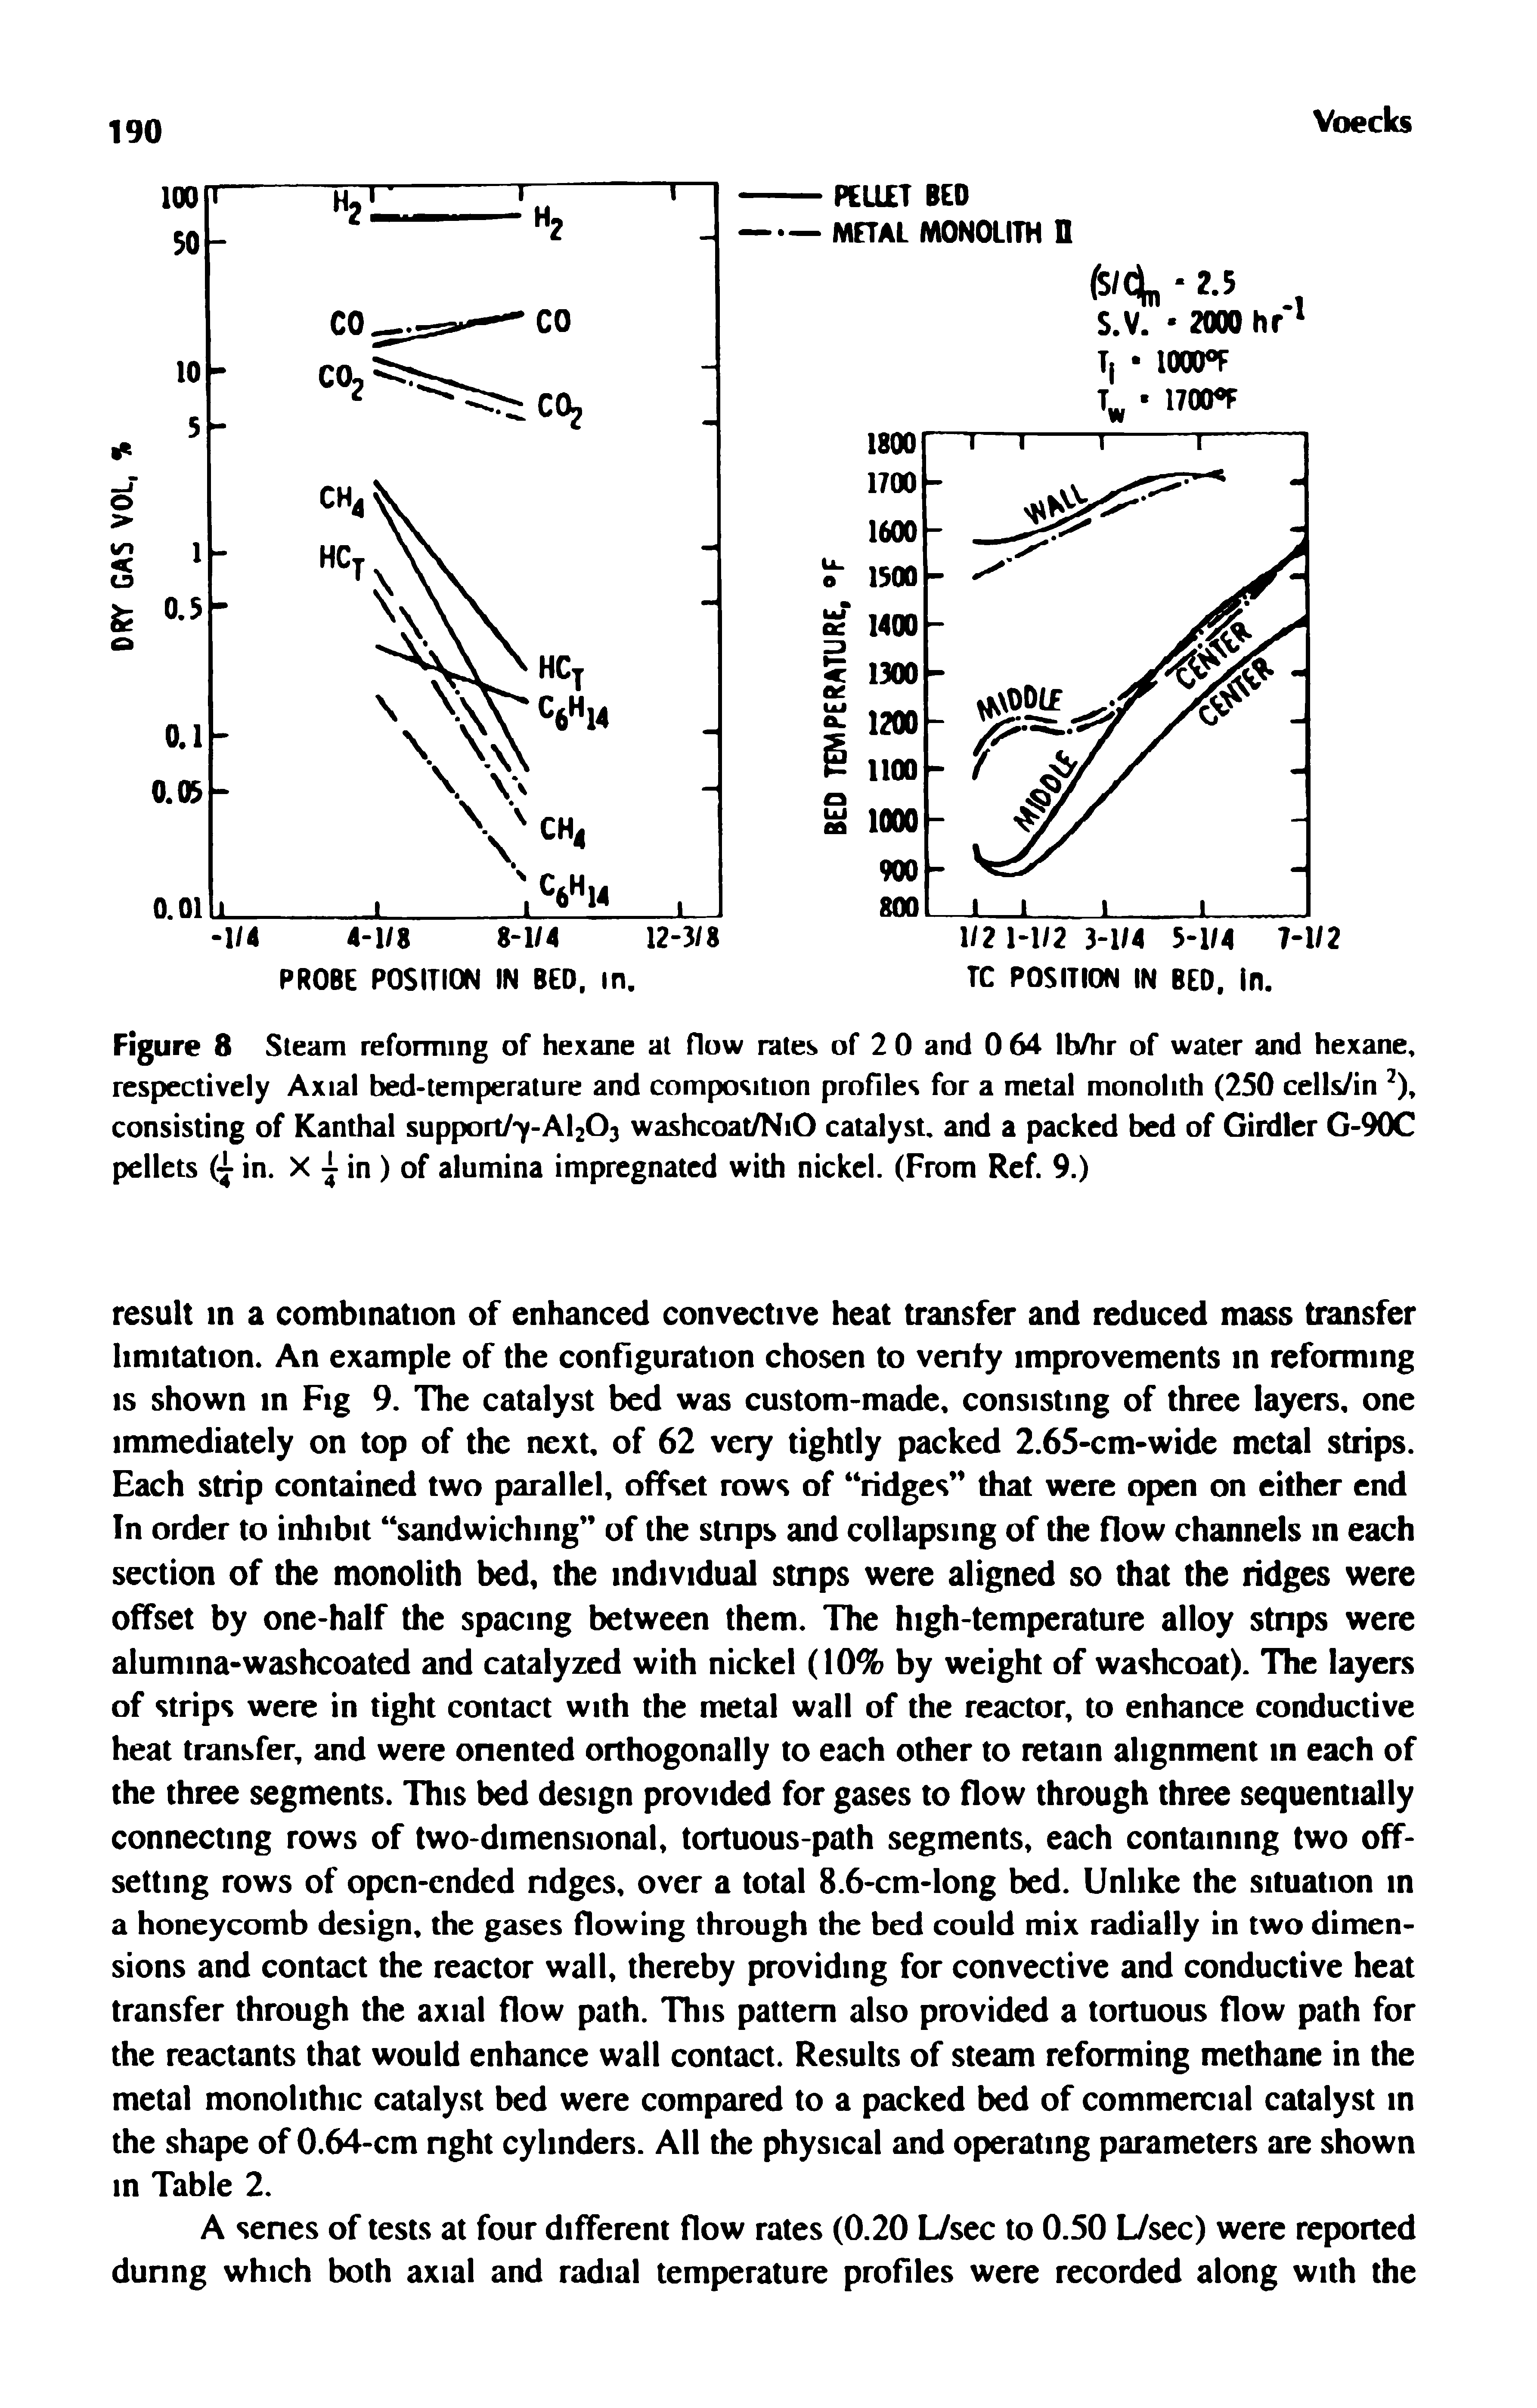 Figure 8 Steam reforming of hexane at flow rates of 2 0 and 0 64 Ib/hr of water and hexane, respectively Axial bed-temperature and composition profiles for a metal monolith (250 cells/in consisting of Kanthal support/7-Al203 washcoat/NiO catalyst, and a packed bed of Girdler G-9(X pellets (j in. X in ) of alumina impregnated with nickel. (From Ref. 9.)...